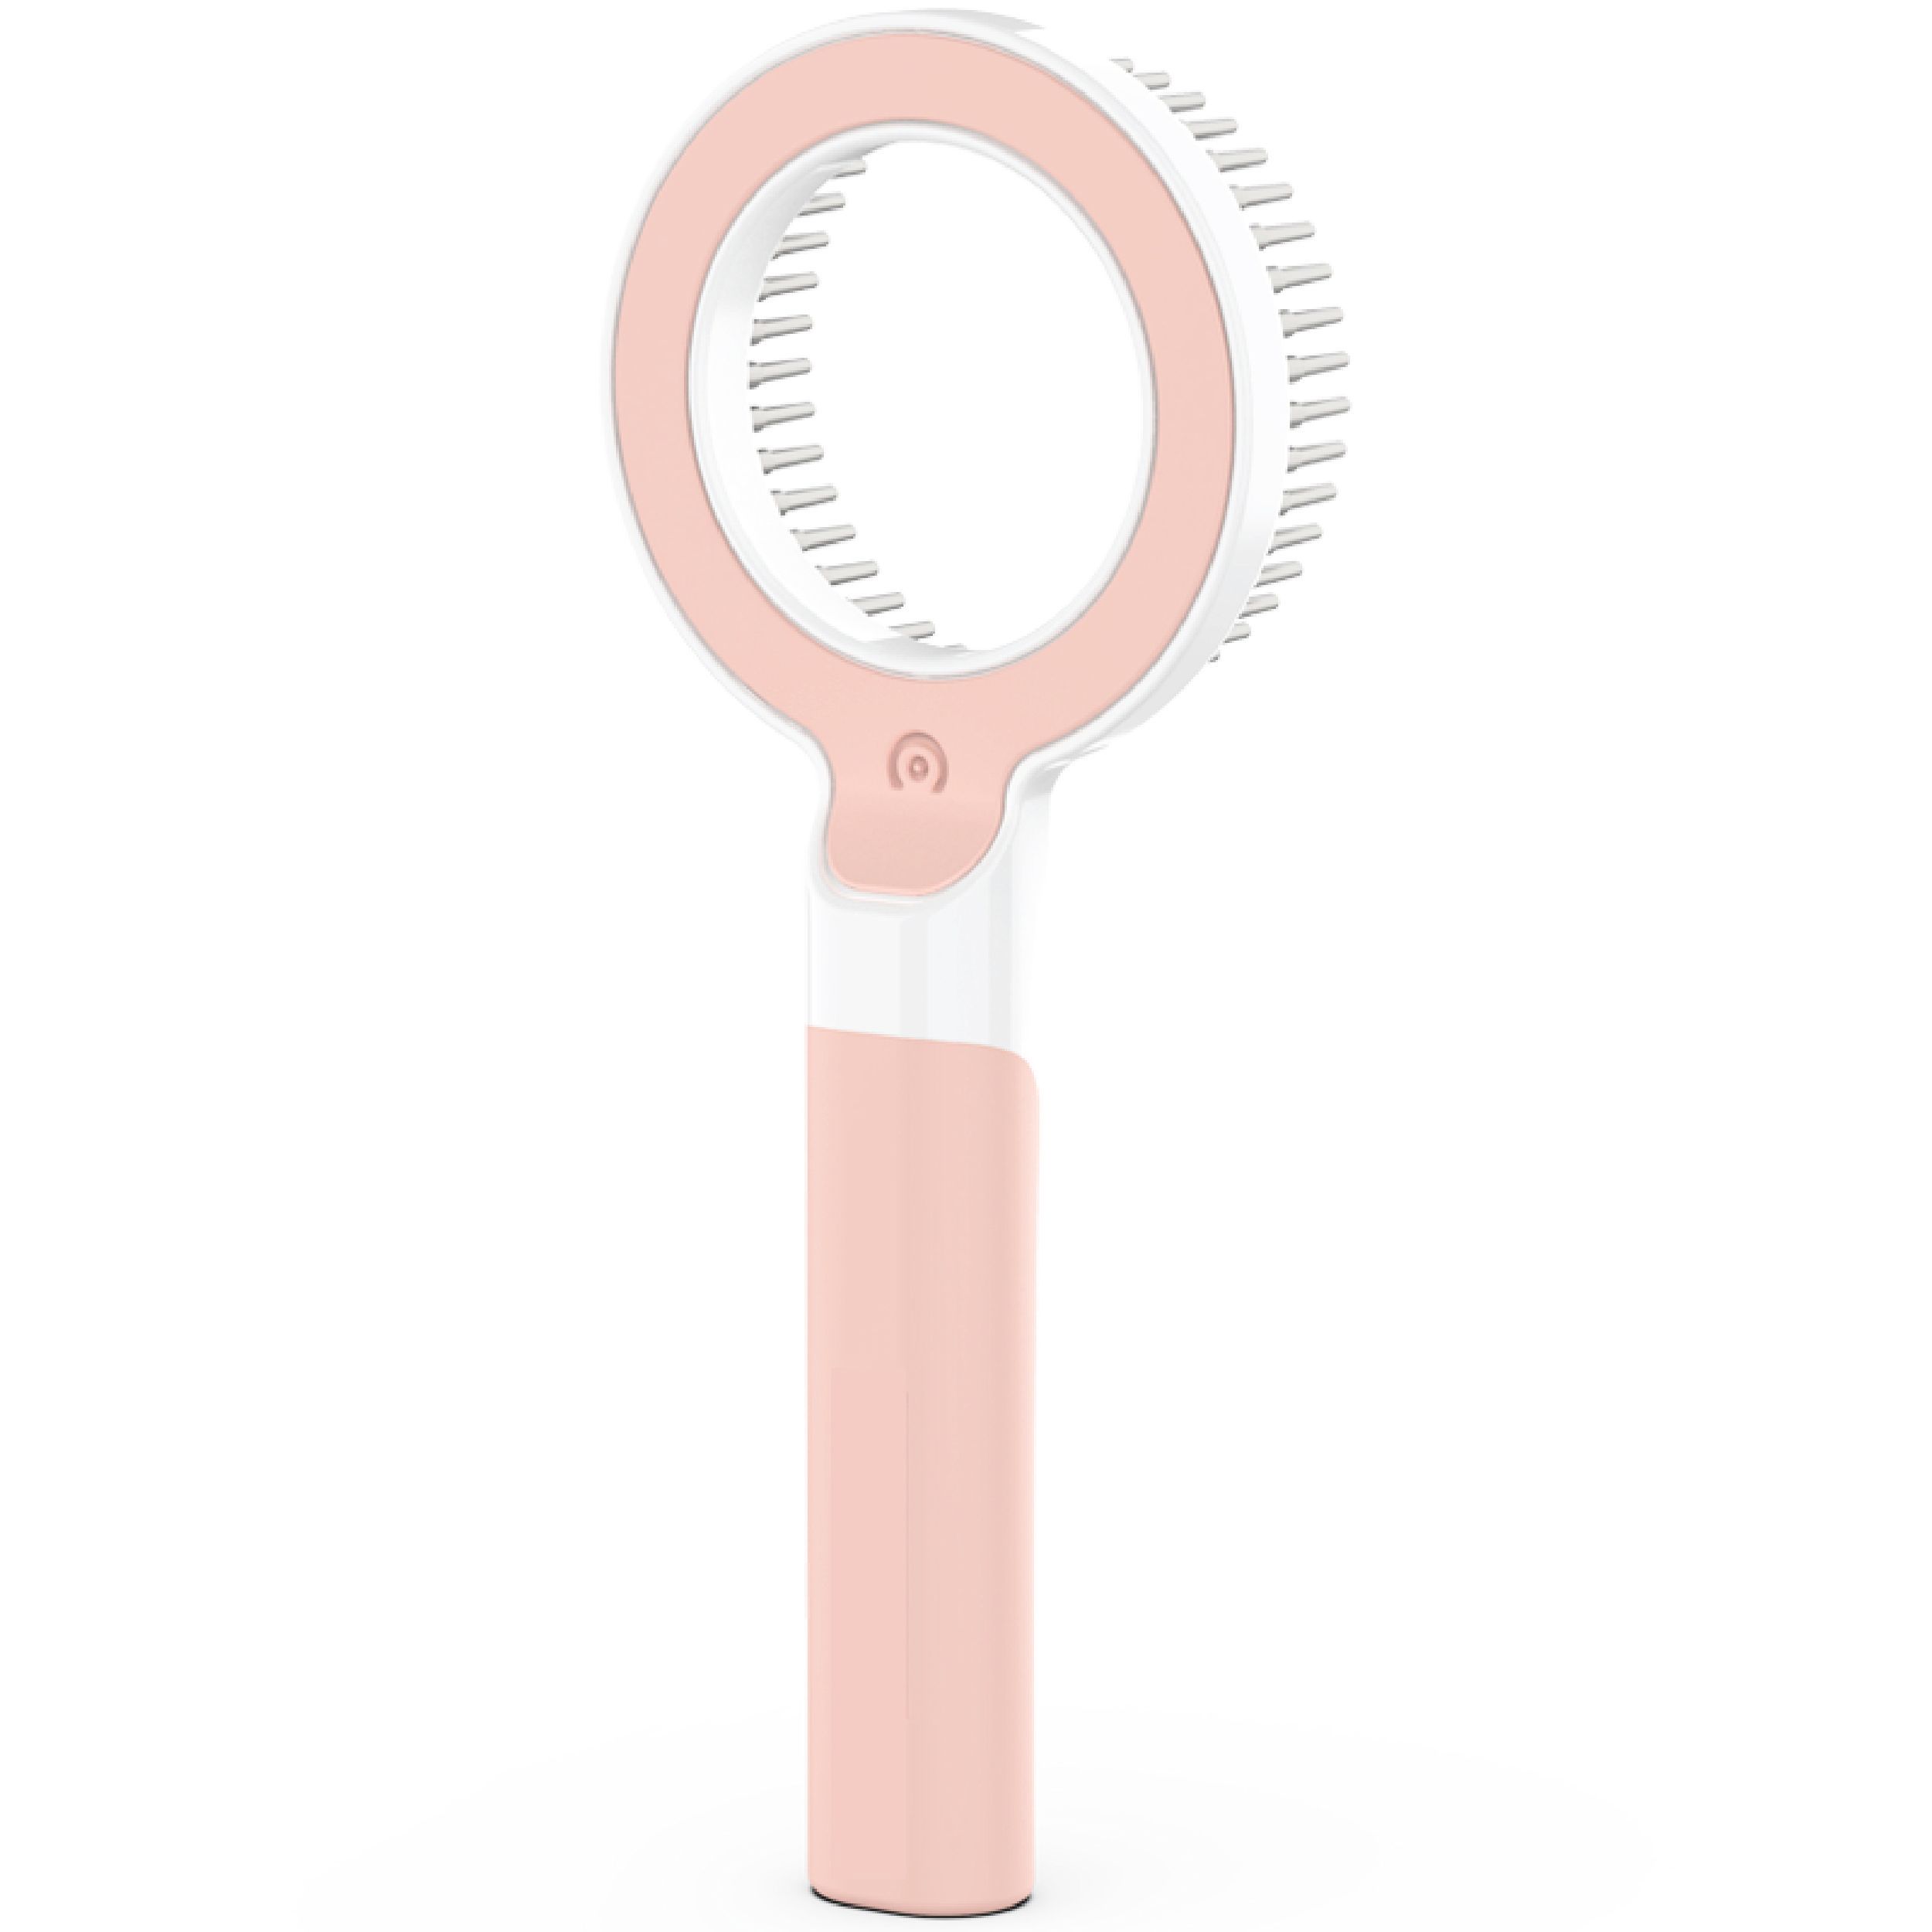 Pet Life ® 'WAGNIFY' 360 Degree and Multi-Directional Modern Grooming Pet Rake Comb Pink 